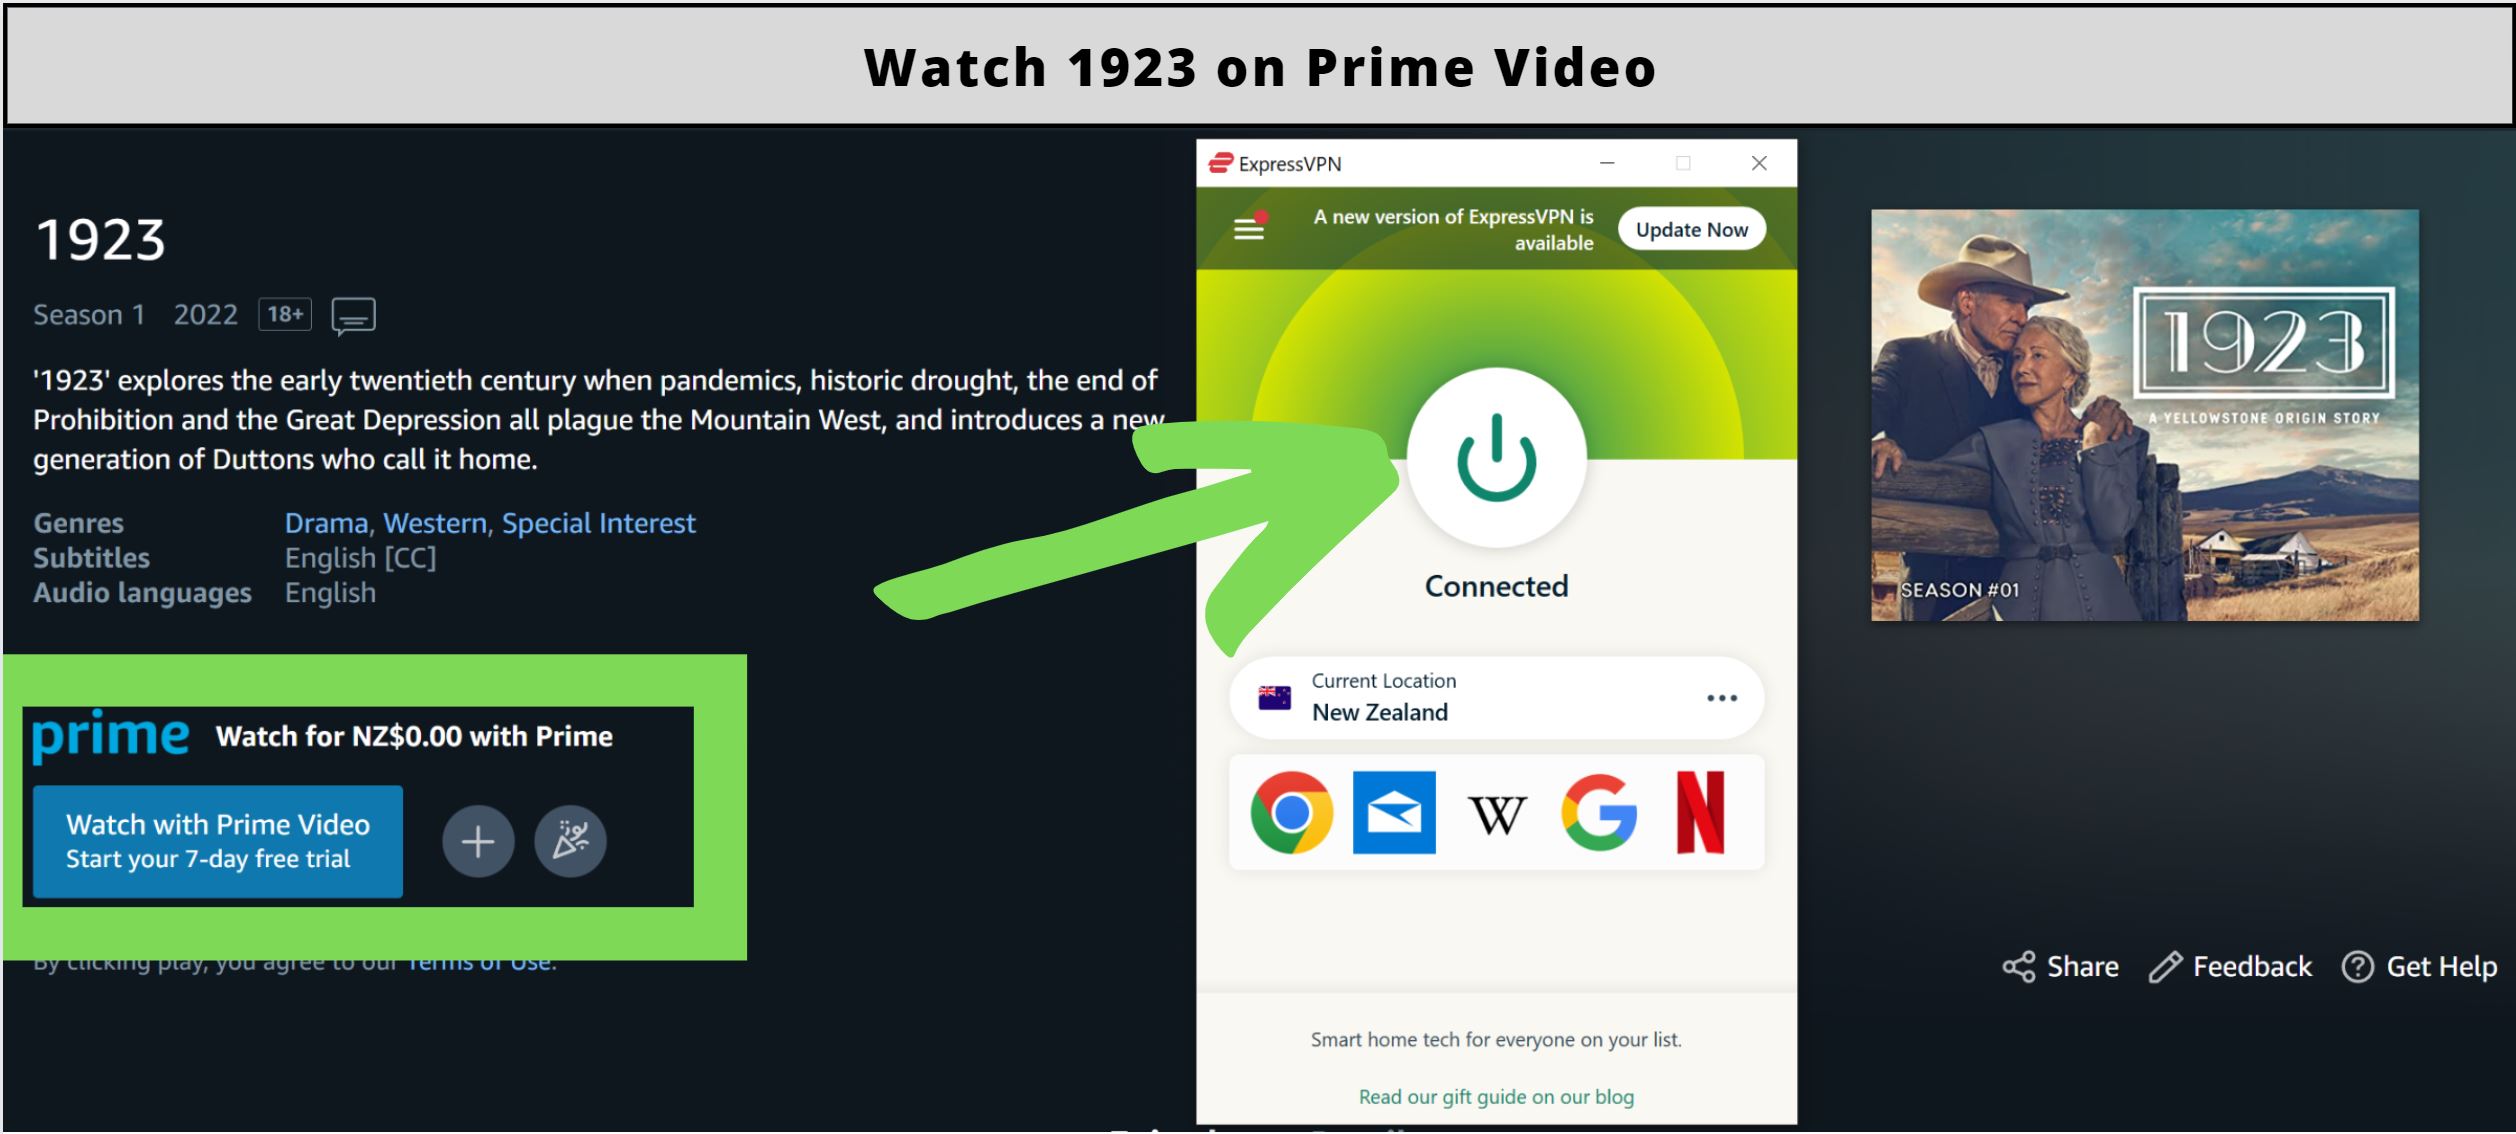 watch 1923 on Prime video